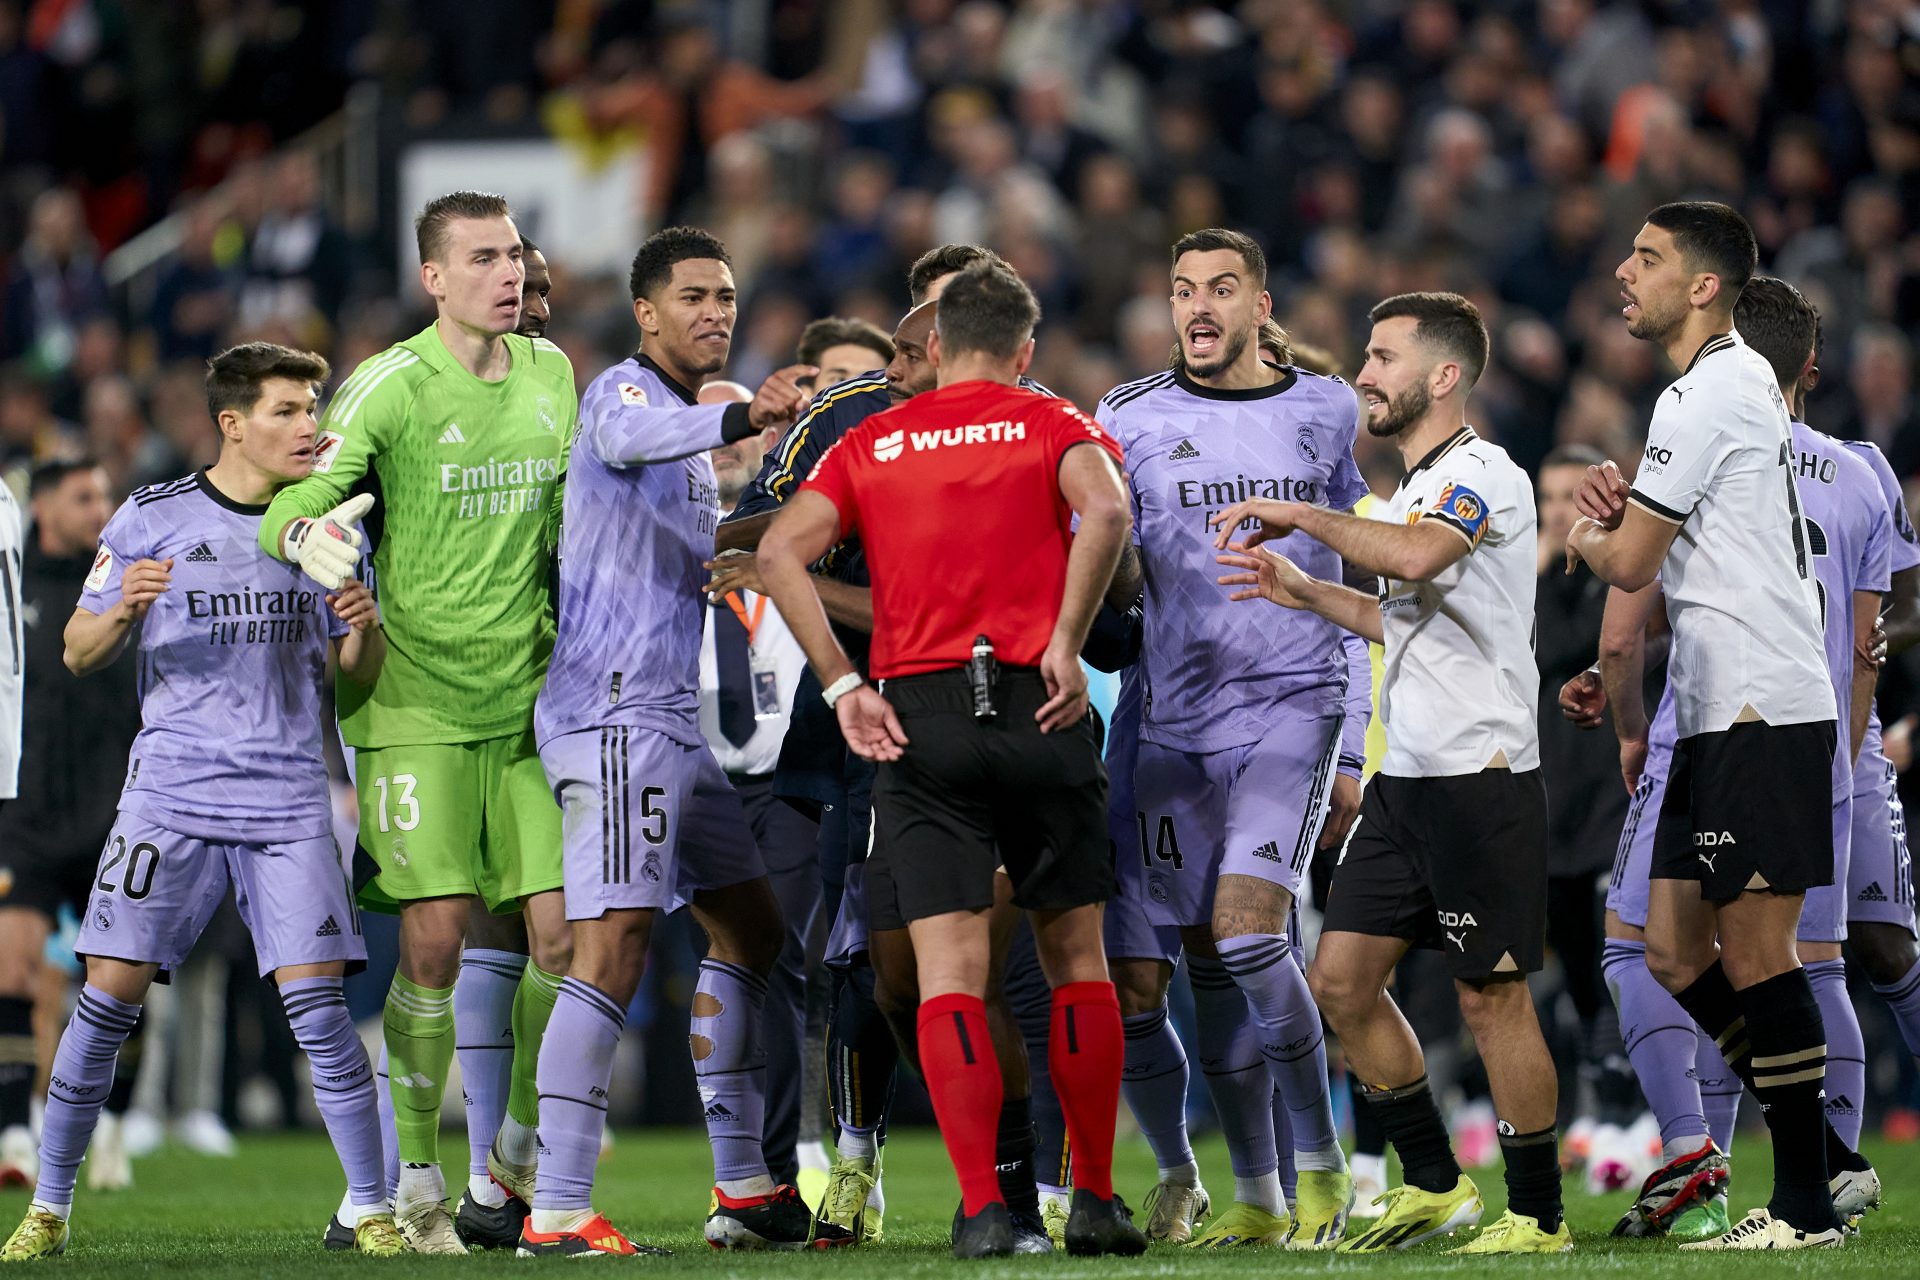 Is Real Madrid suffering from biased refereeing?